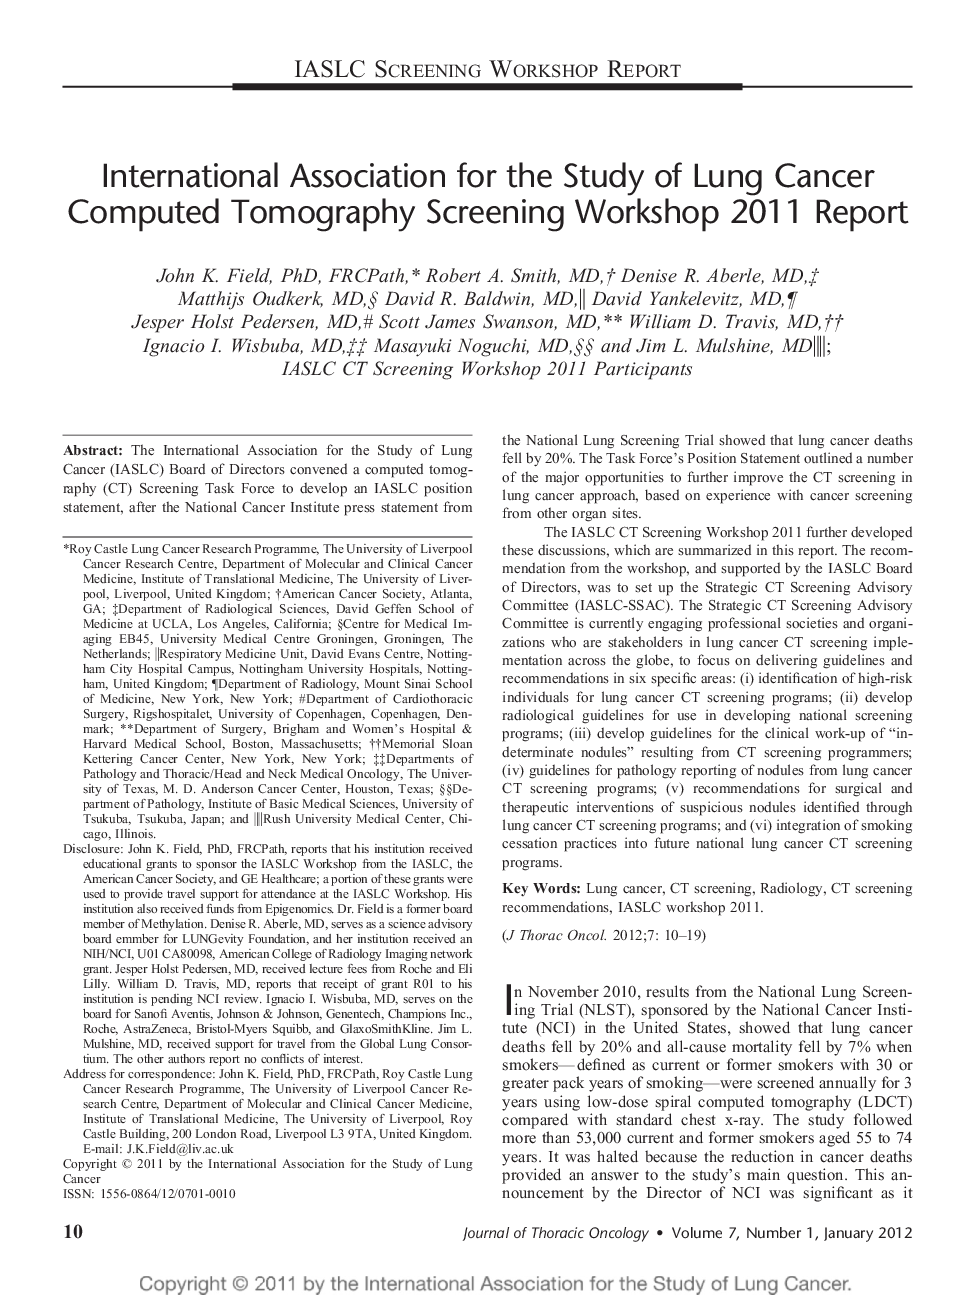 International Association for the Study of Lung Cancer Computed Tomography Screening Workshop 2011 Report 